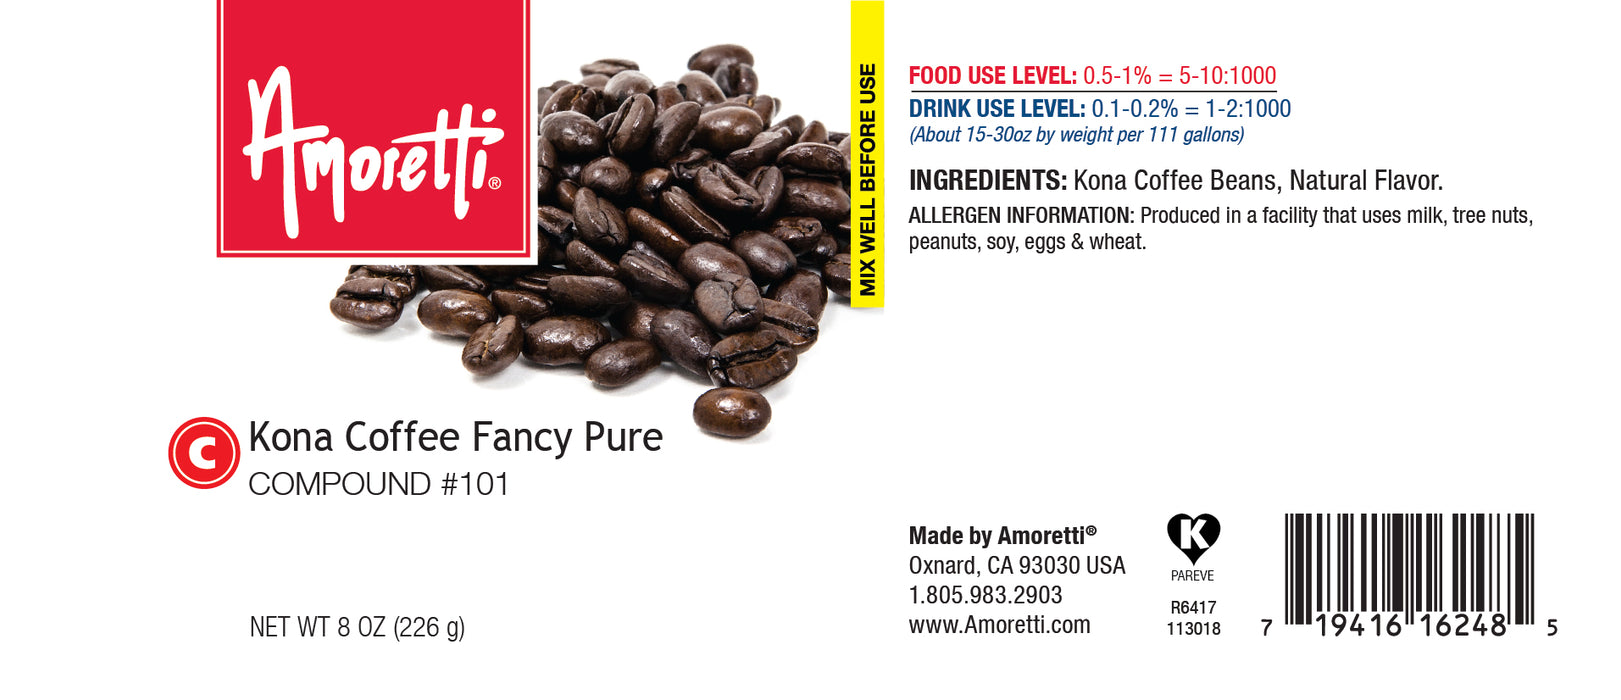 Kona Coffee Fancy Pure for whipped cream and buttercream Compound